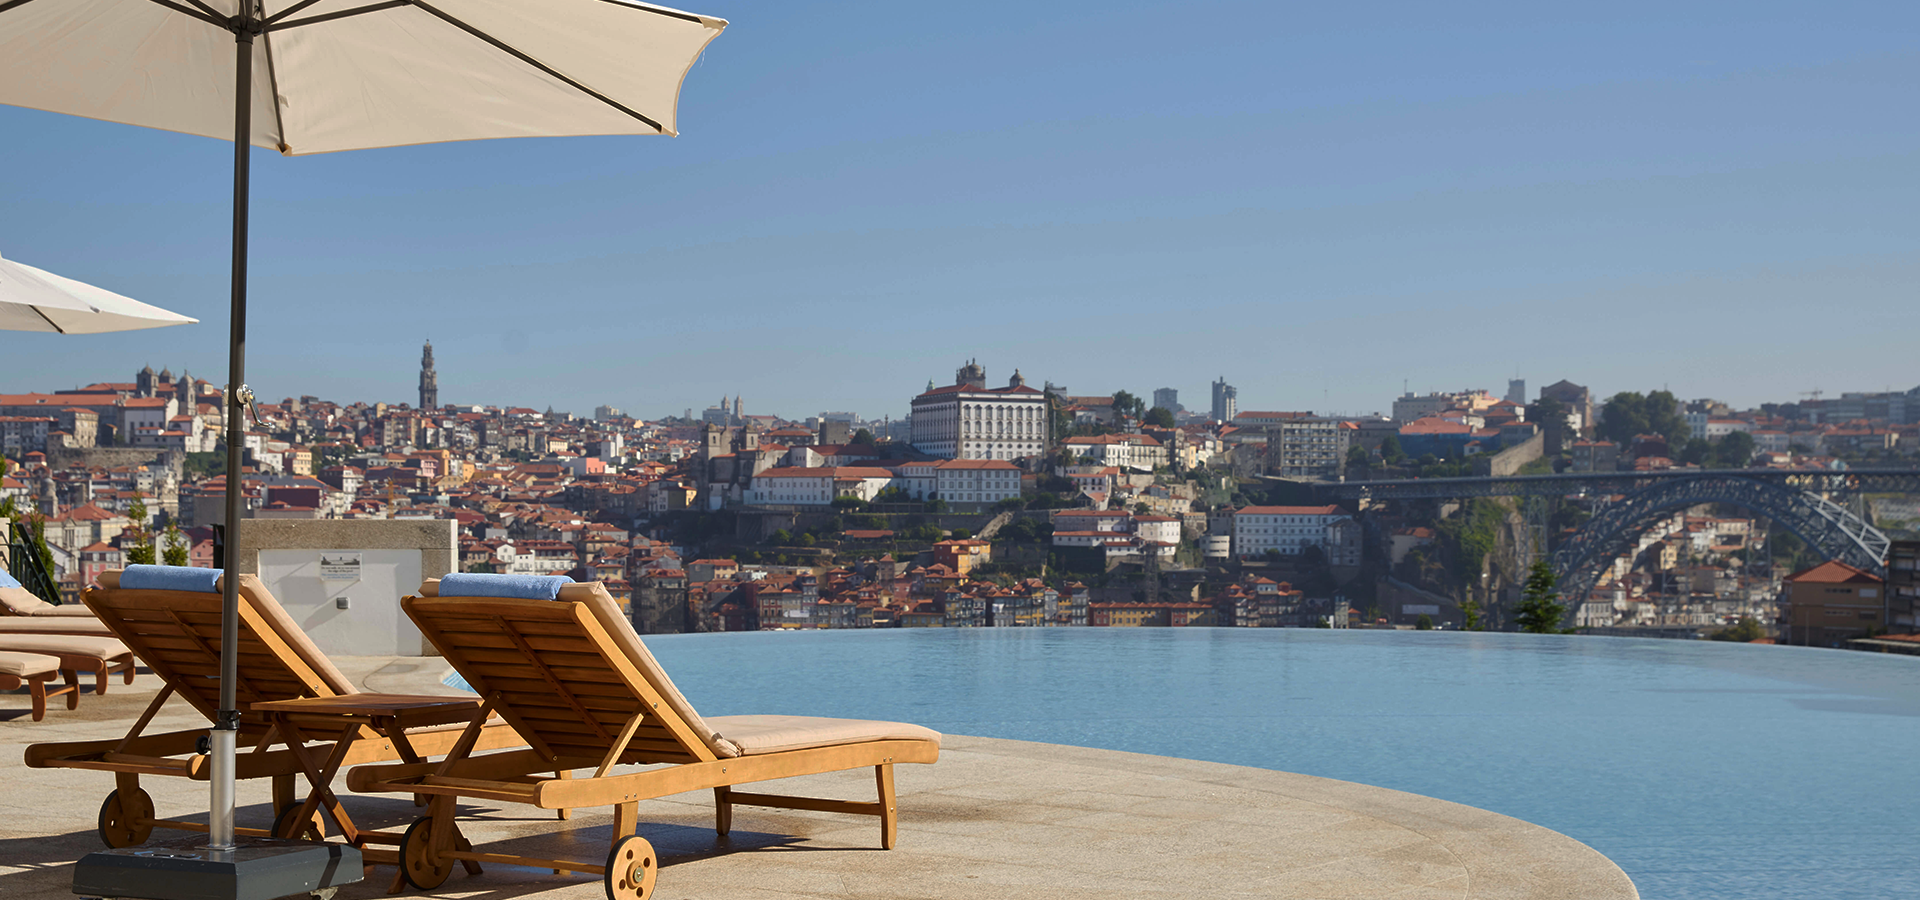 View of Porto, Portugal from The Yeatman